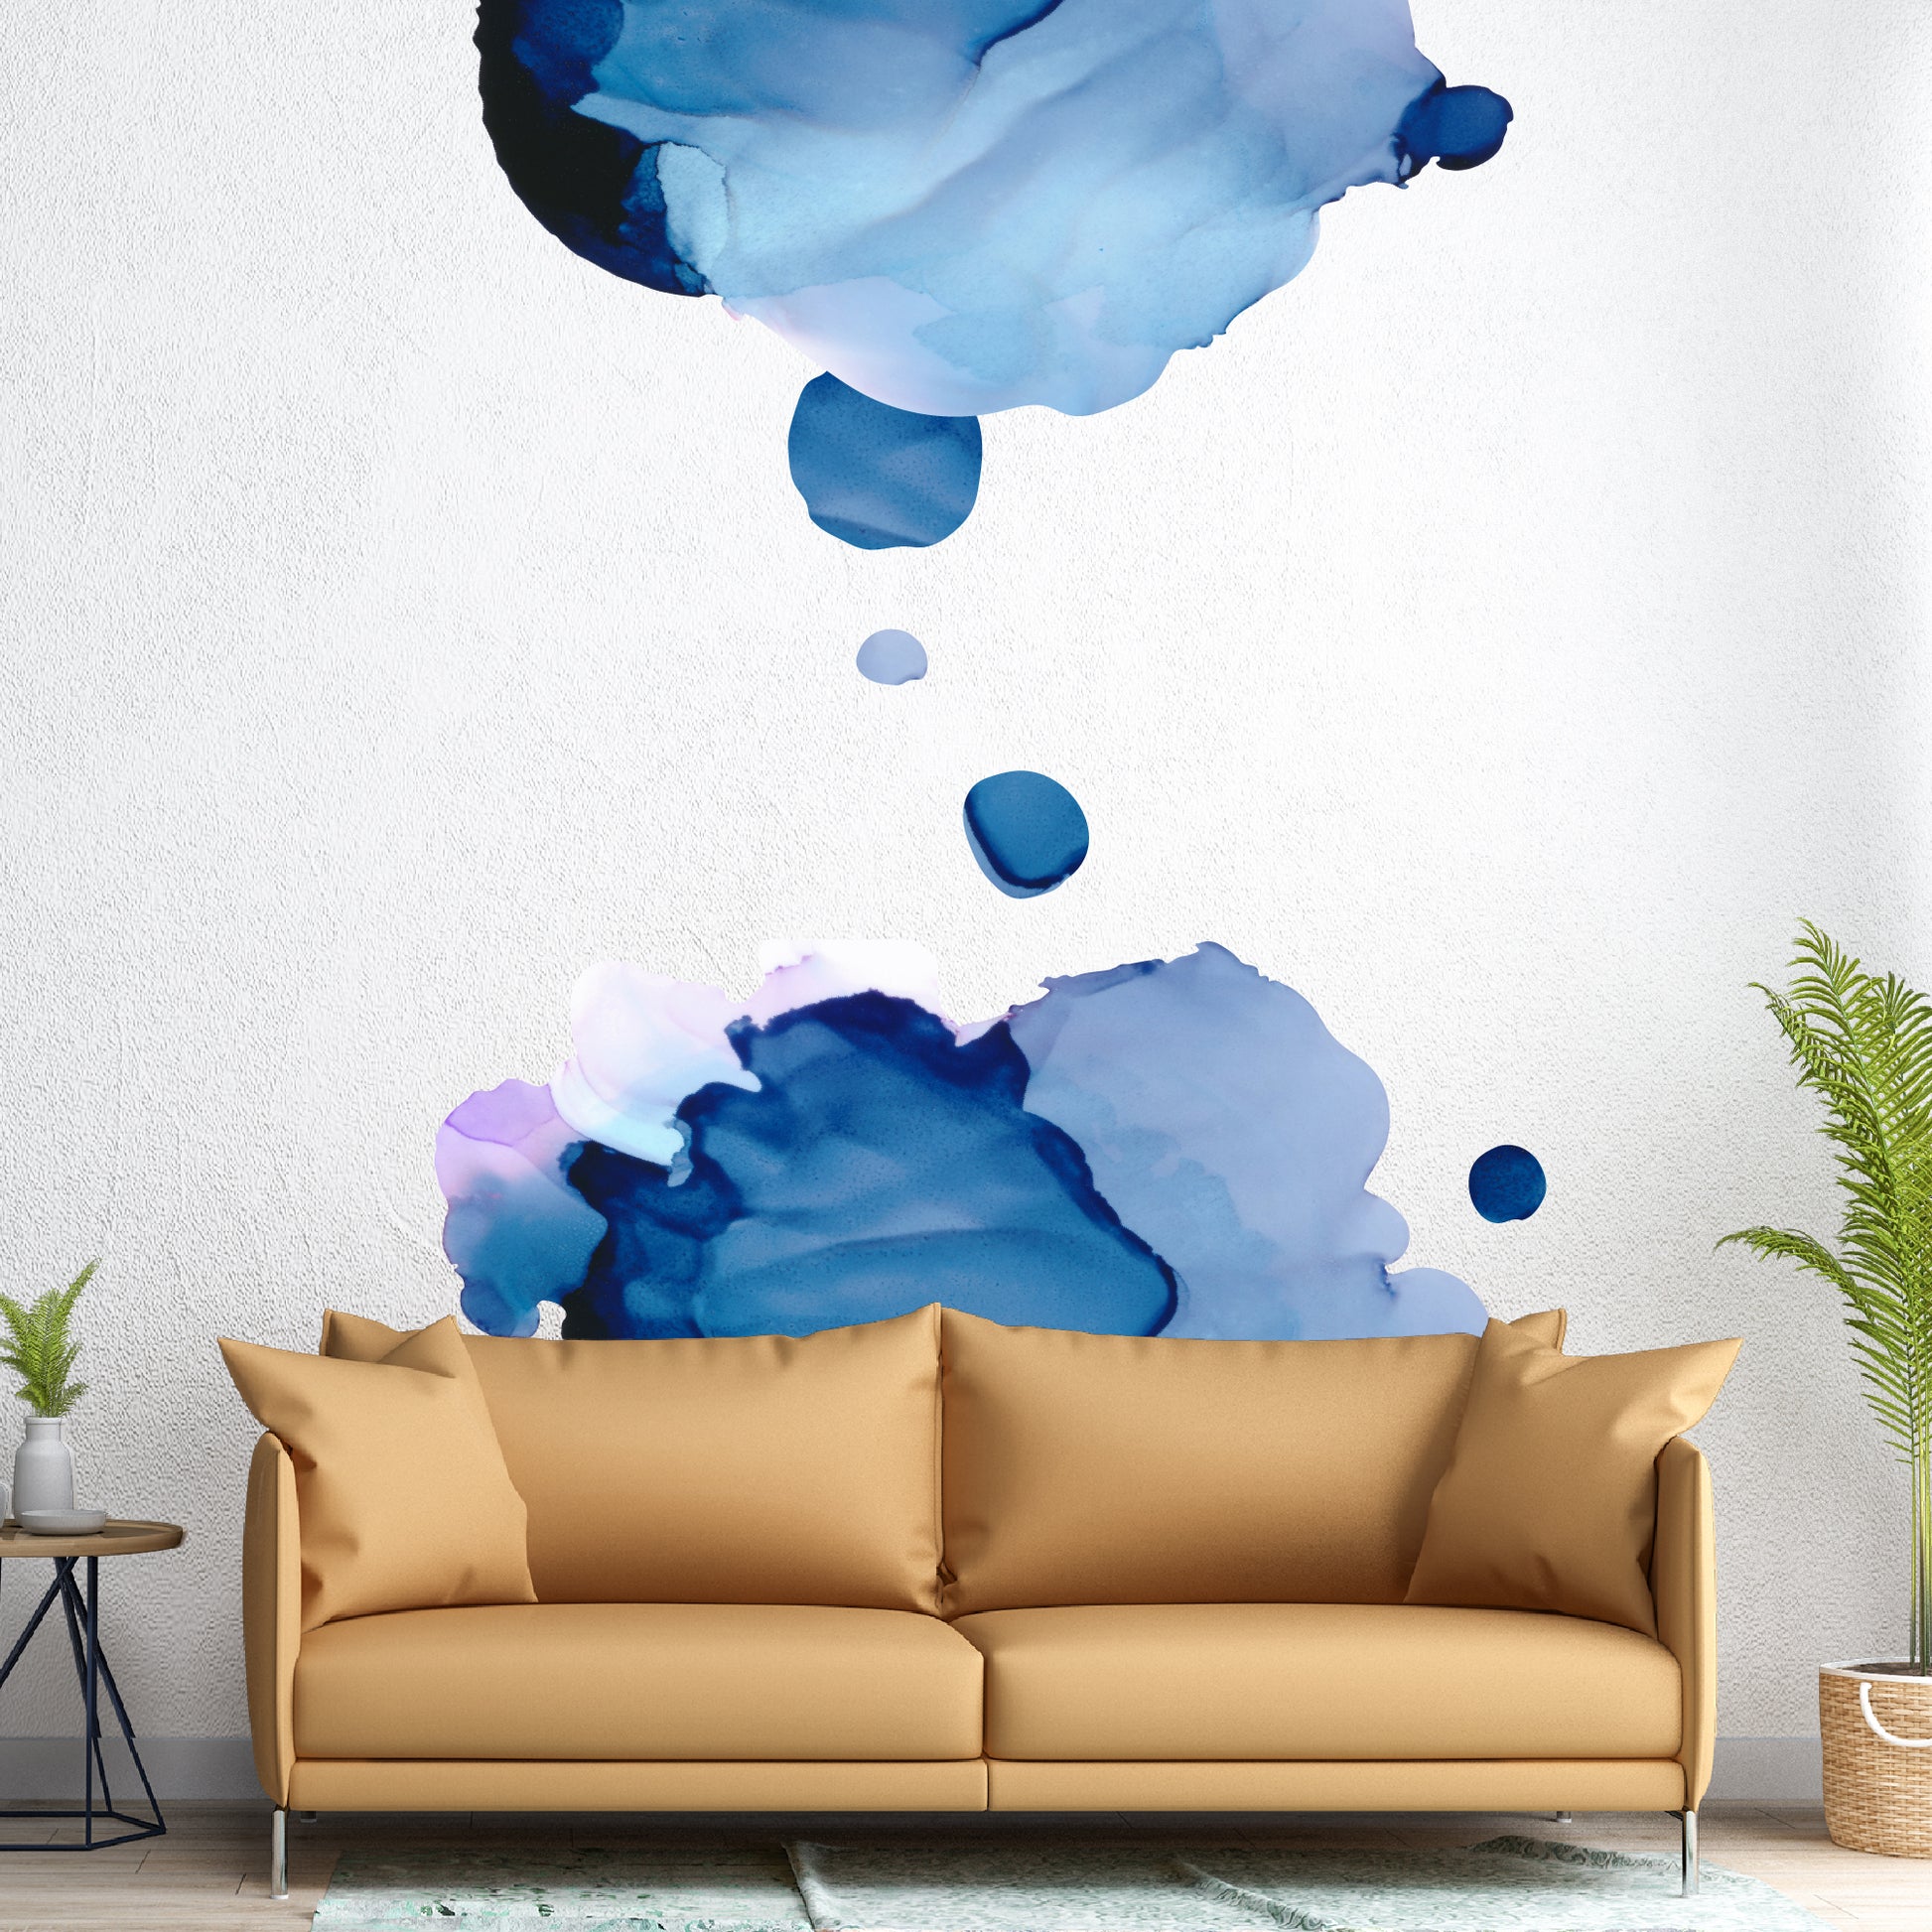 Abstract Watercolor Ink Removable Wall Decal - picture perfect decals